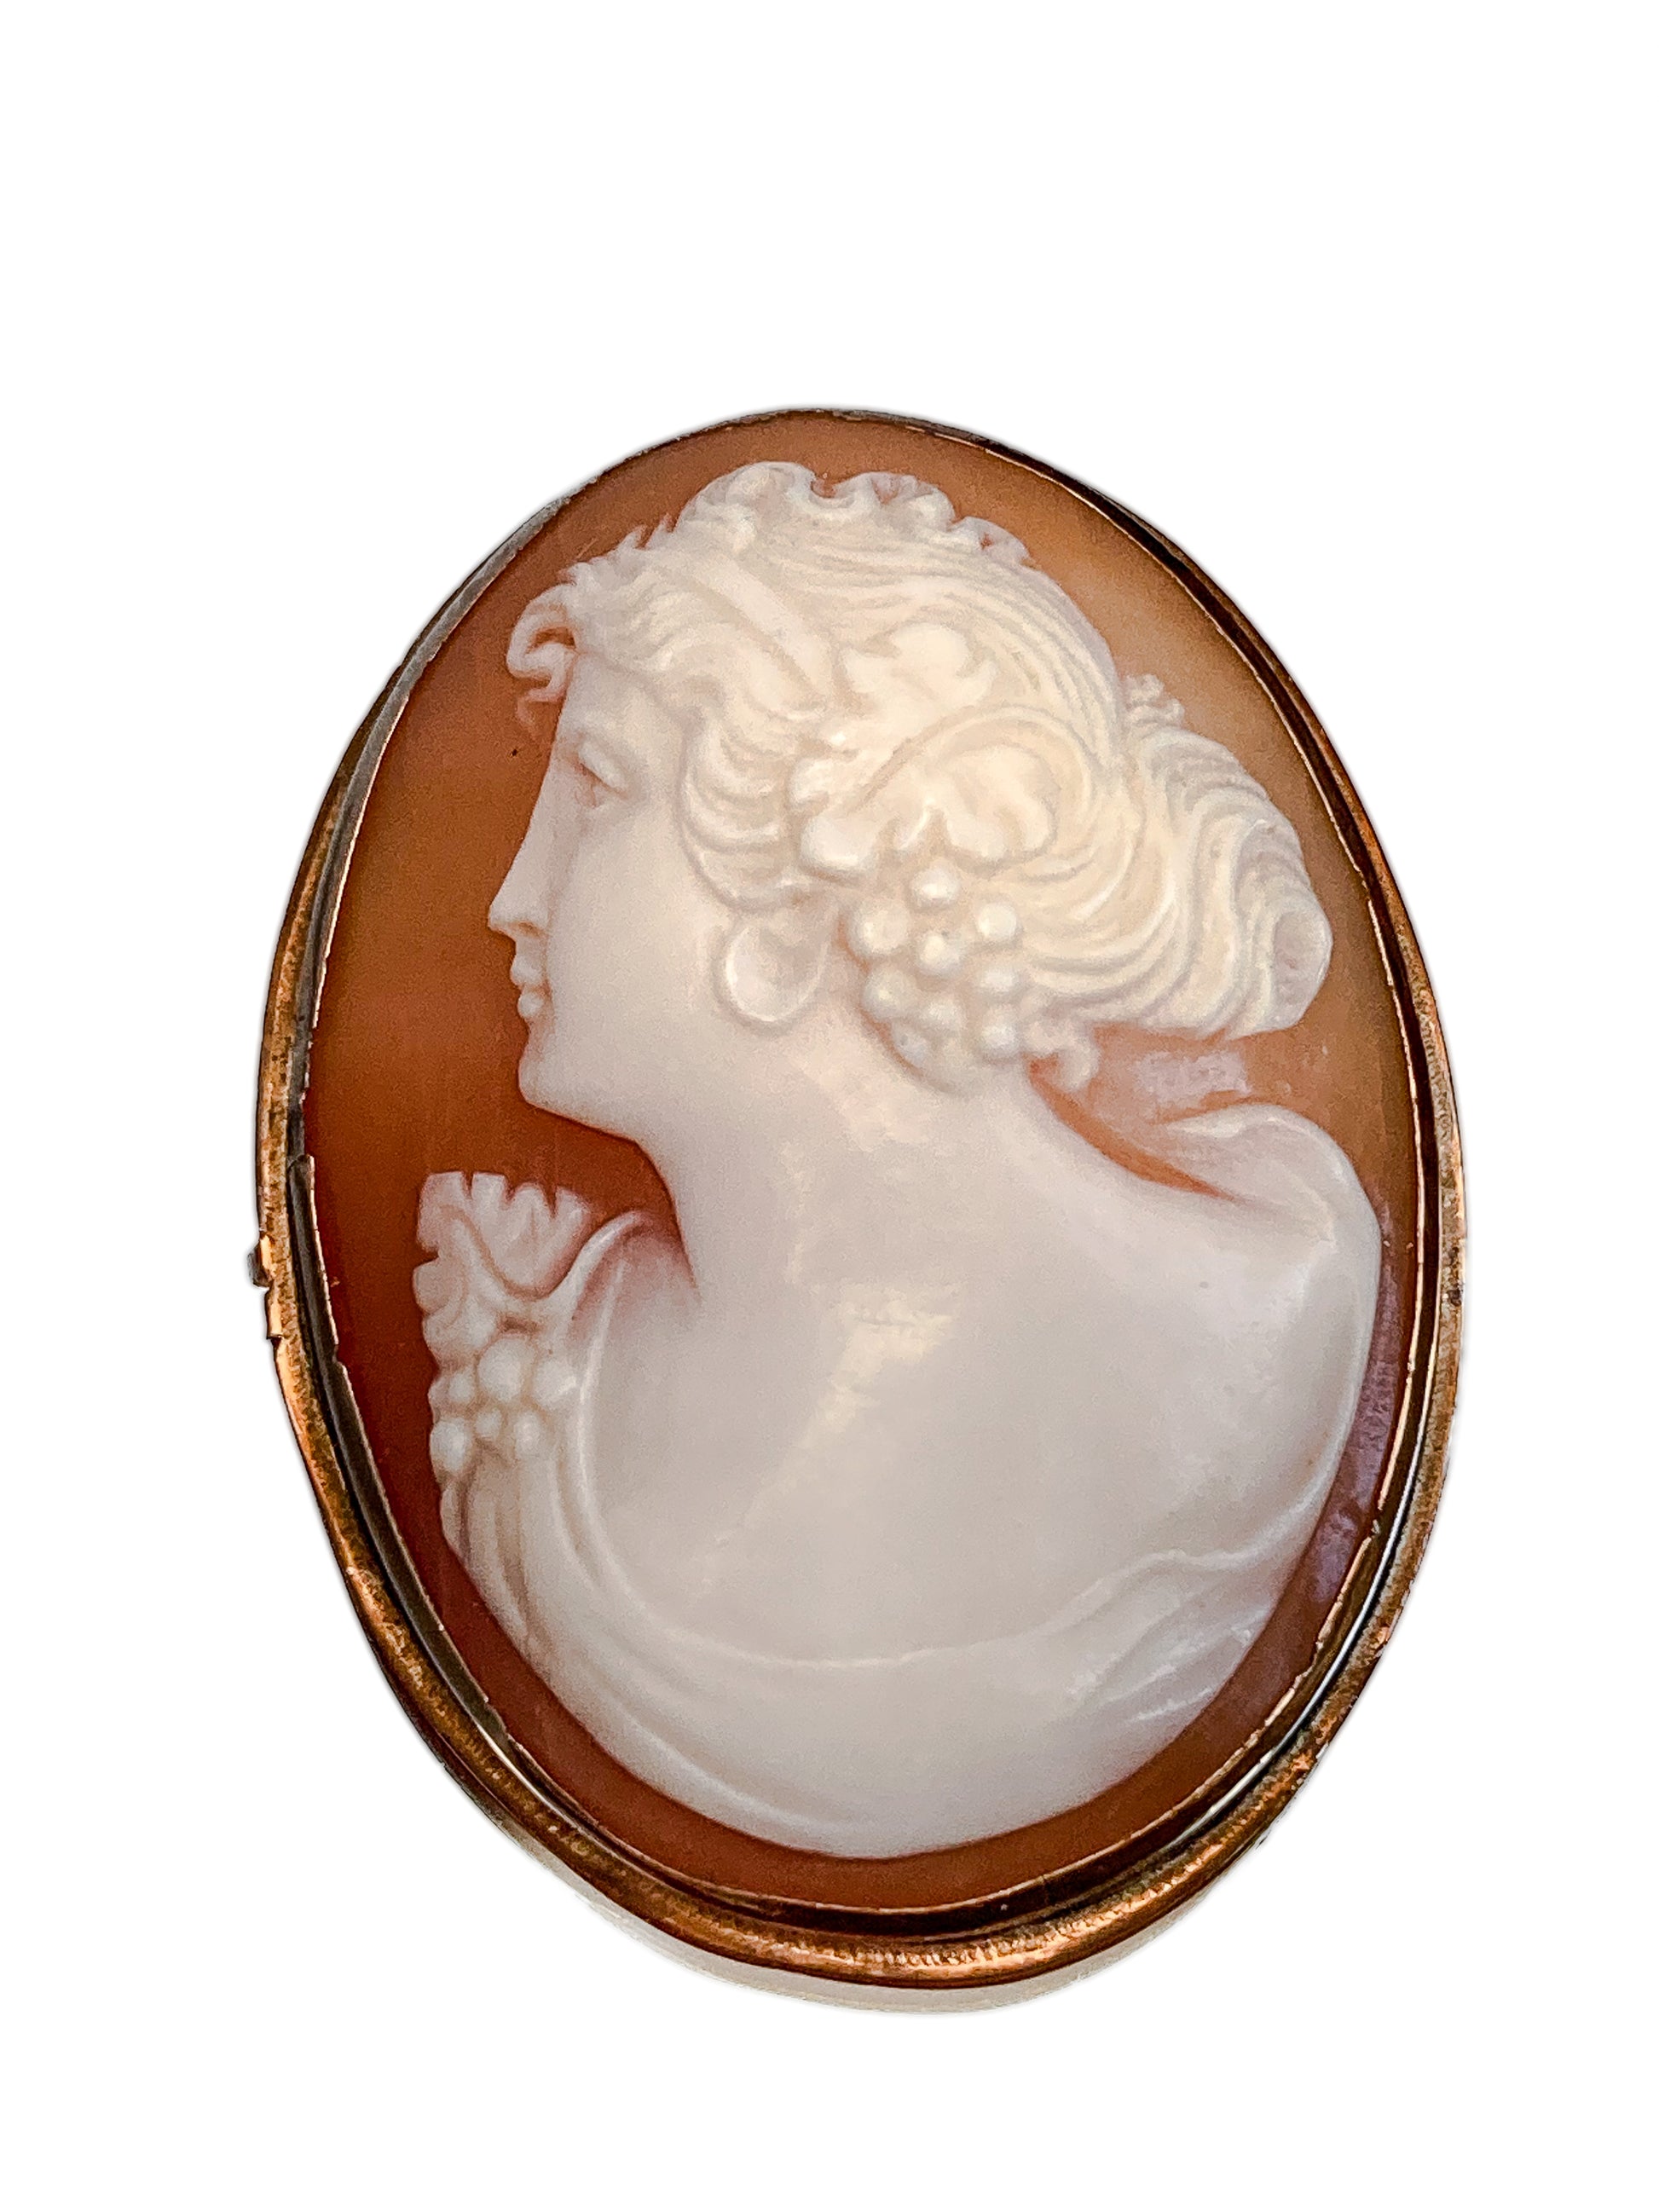 Antique Carved Shell Cameo 14K Gold Bezel Convertible Brooch Pin Pendant; Early 20th Century